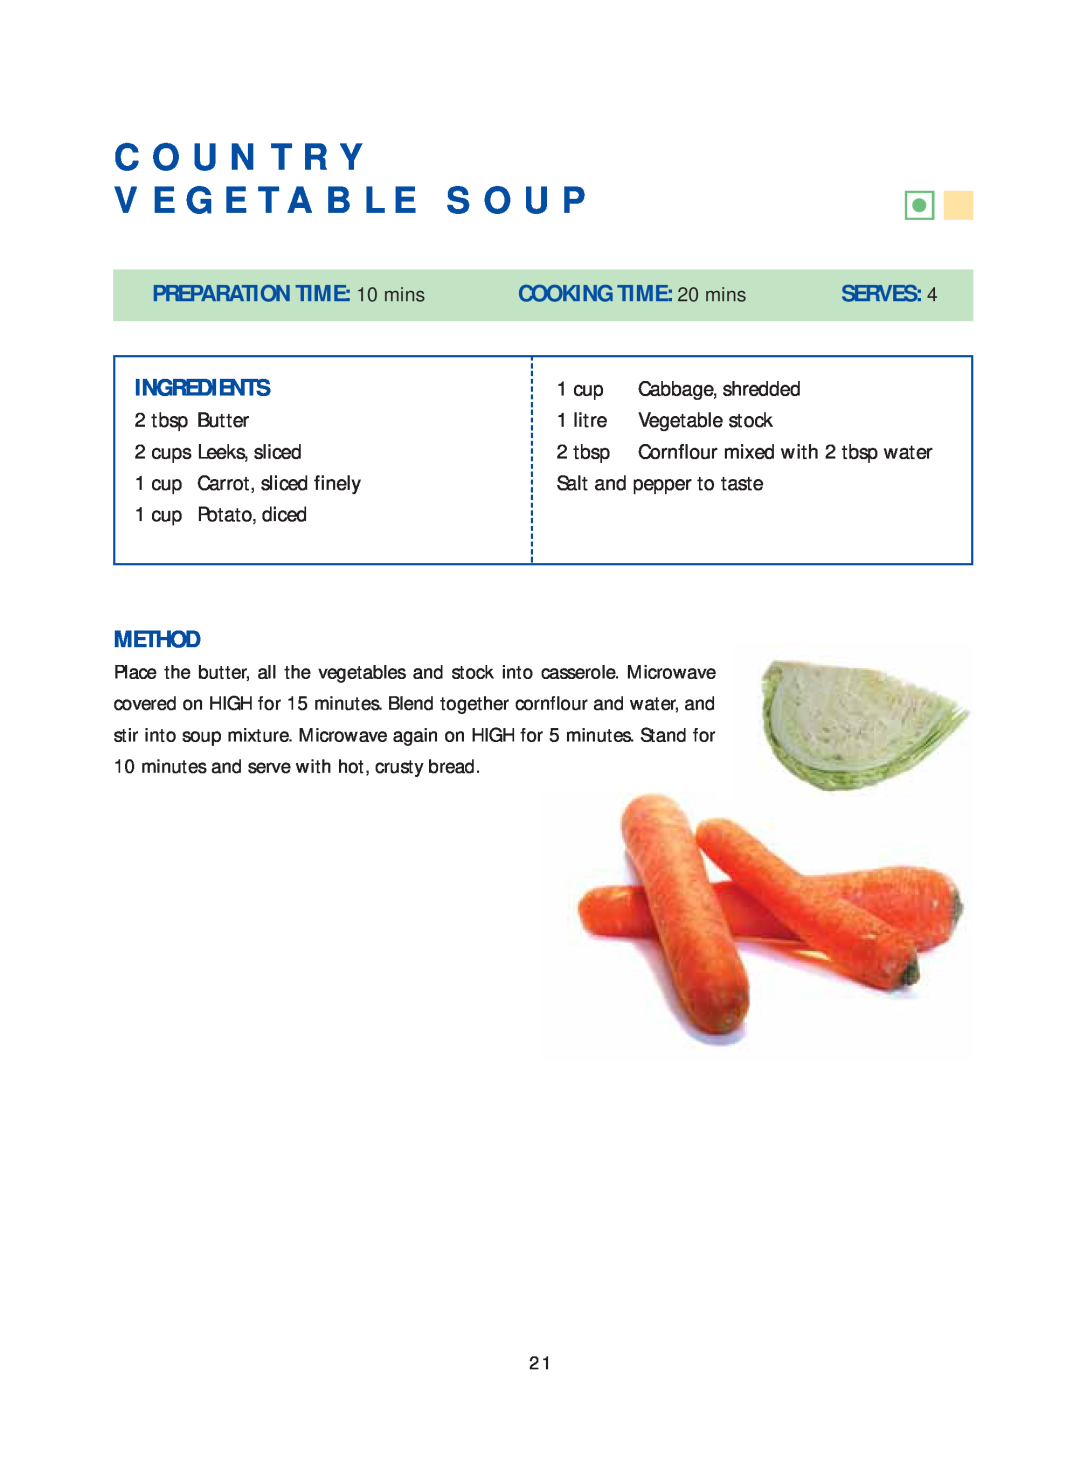 Samsung Microwave Oven Country Vegetable Soup, PREPARATION TIME: 10 mins, COOKING TIME: 20 mins, Serves, Ingredients 